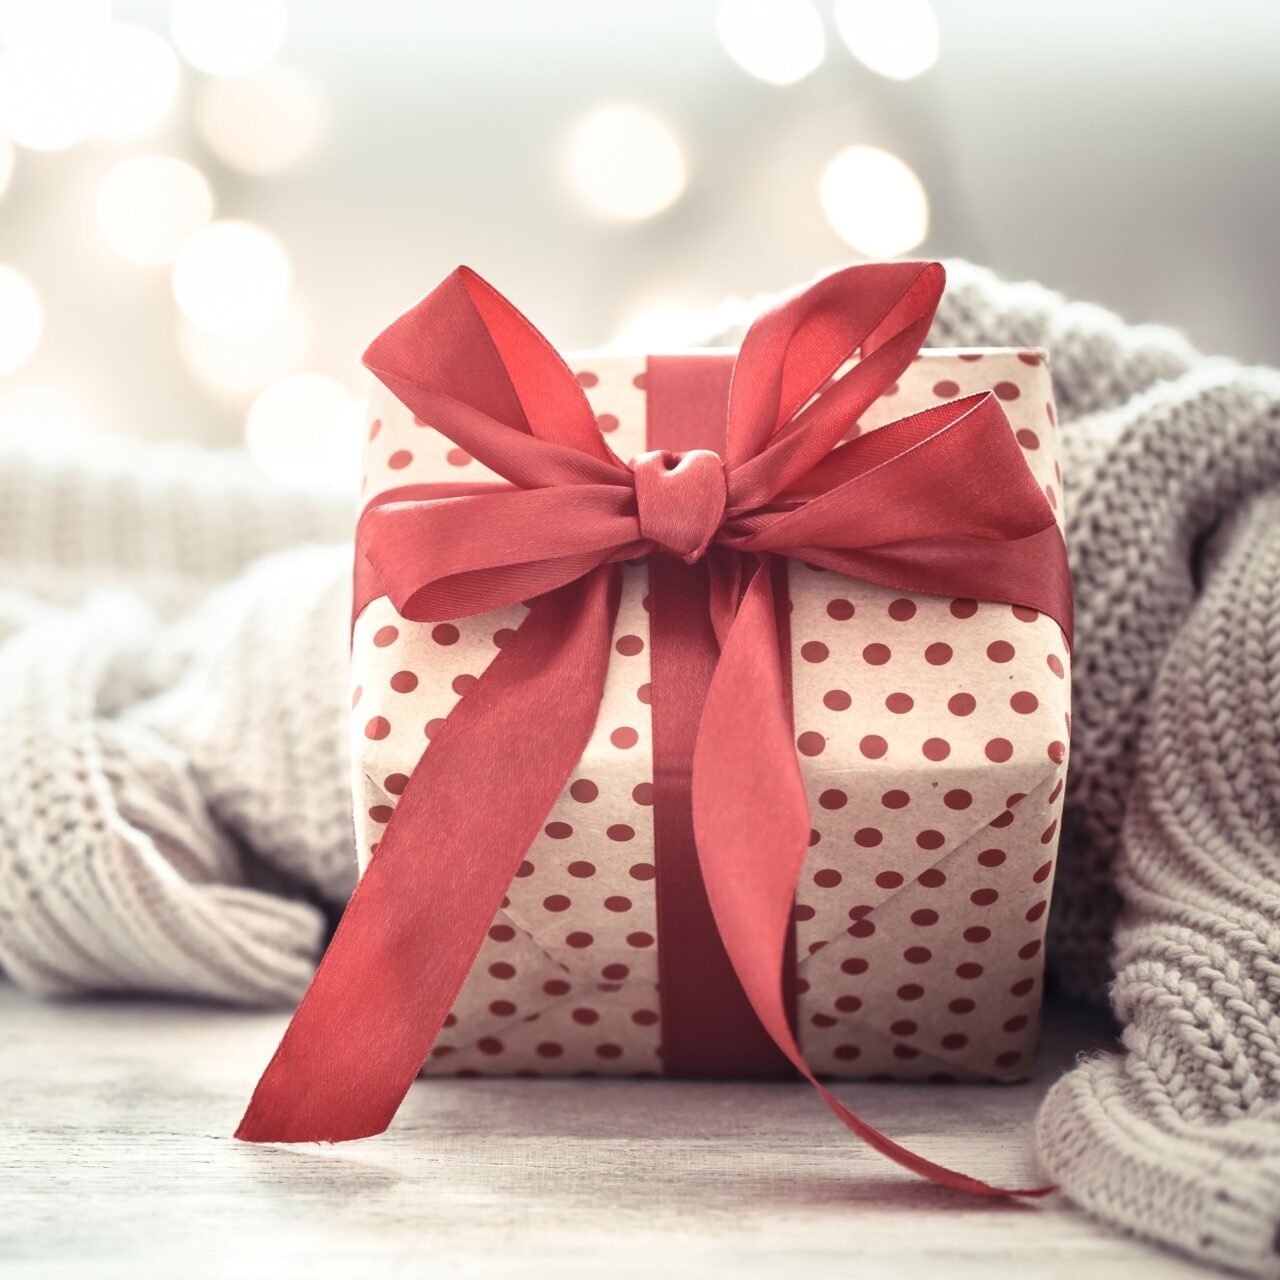 GIFT CARD 75€ ggift in a beautiful box with a red bow and grey blanket